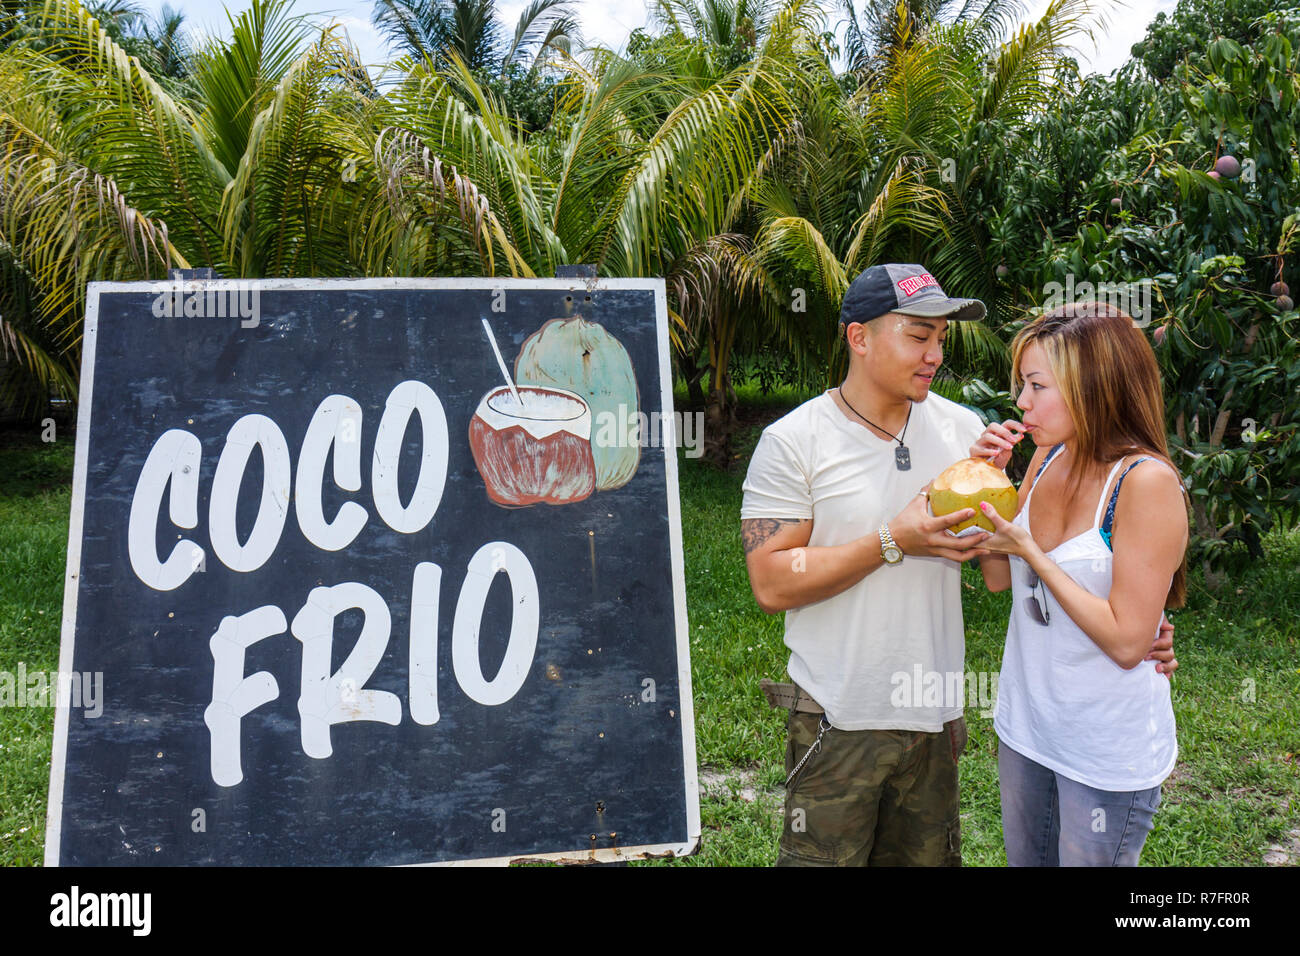 Miami Florida,Davie,Bob Roth's New River Groves,roadside fruit stand,local products,sign,coco frio,Spanish language,bilingual,cold coconut water,Asian Stock Photo